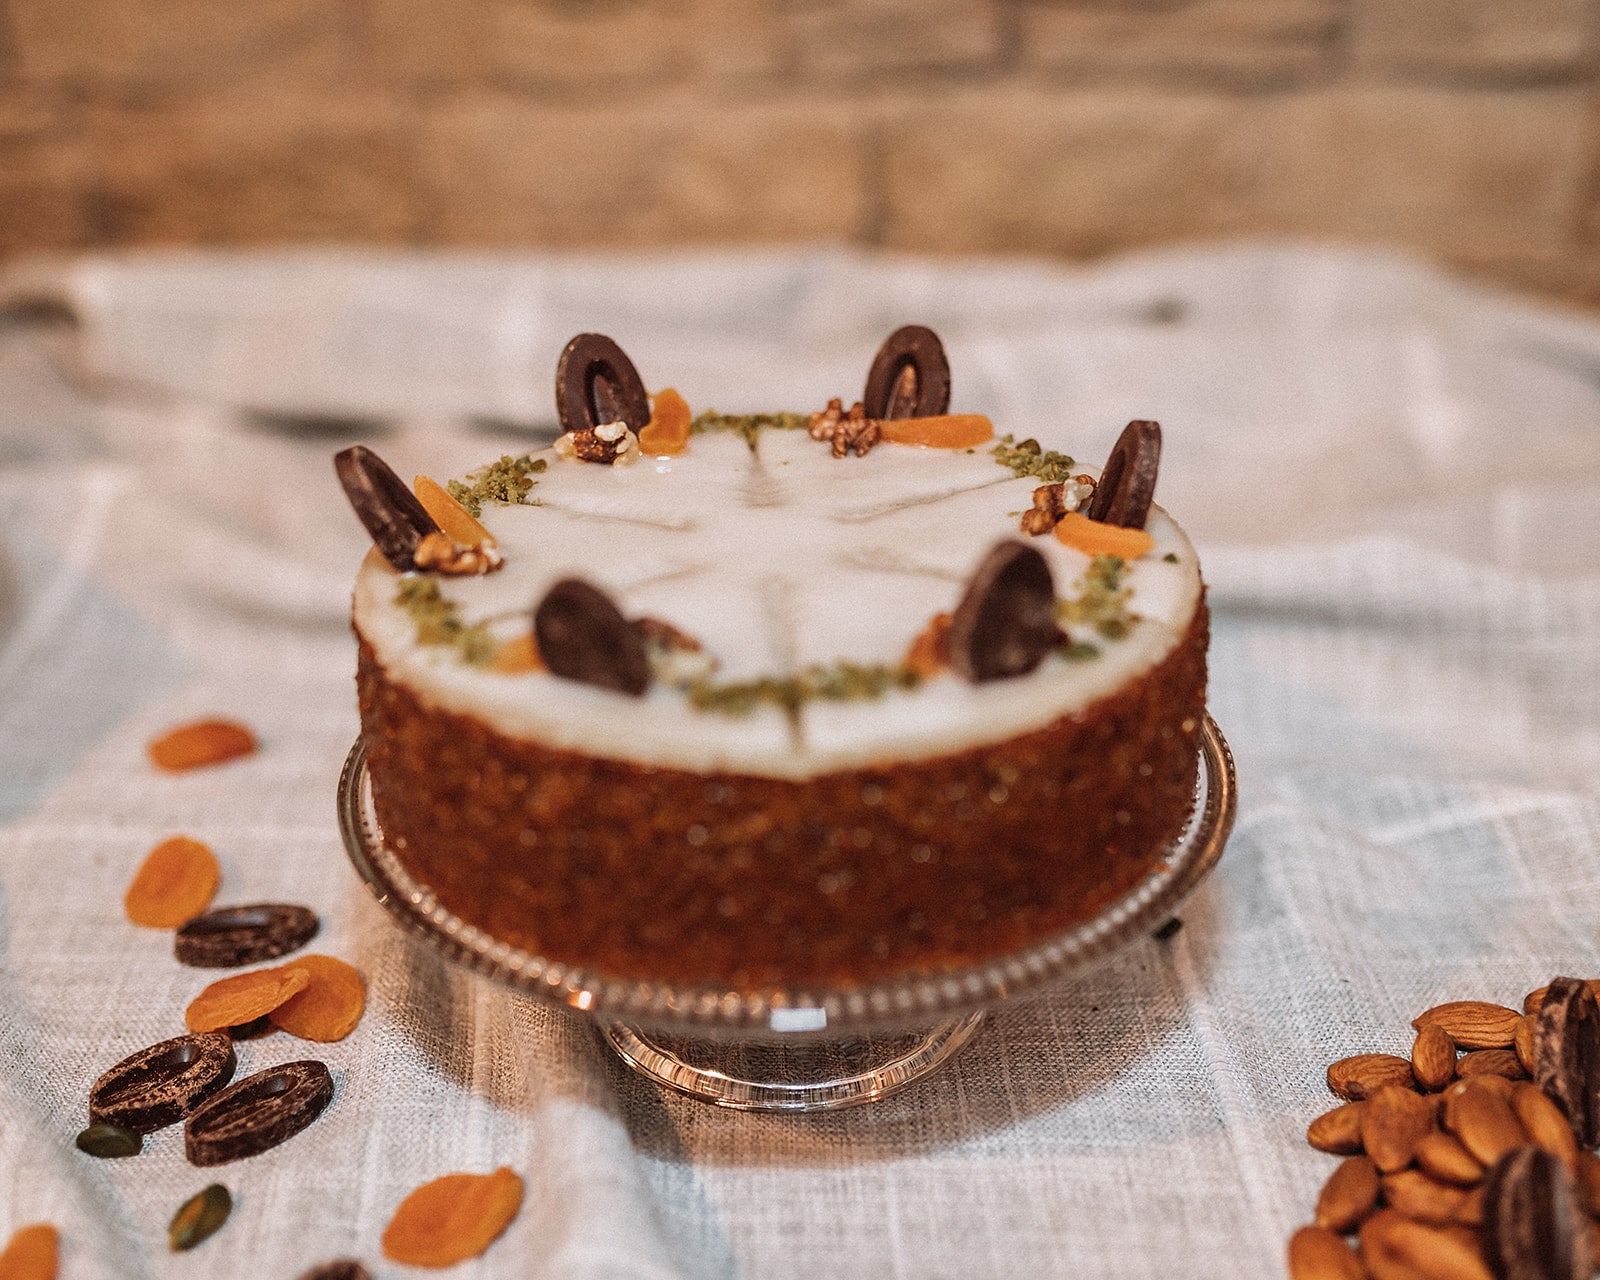 Carrot cake without dairy products